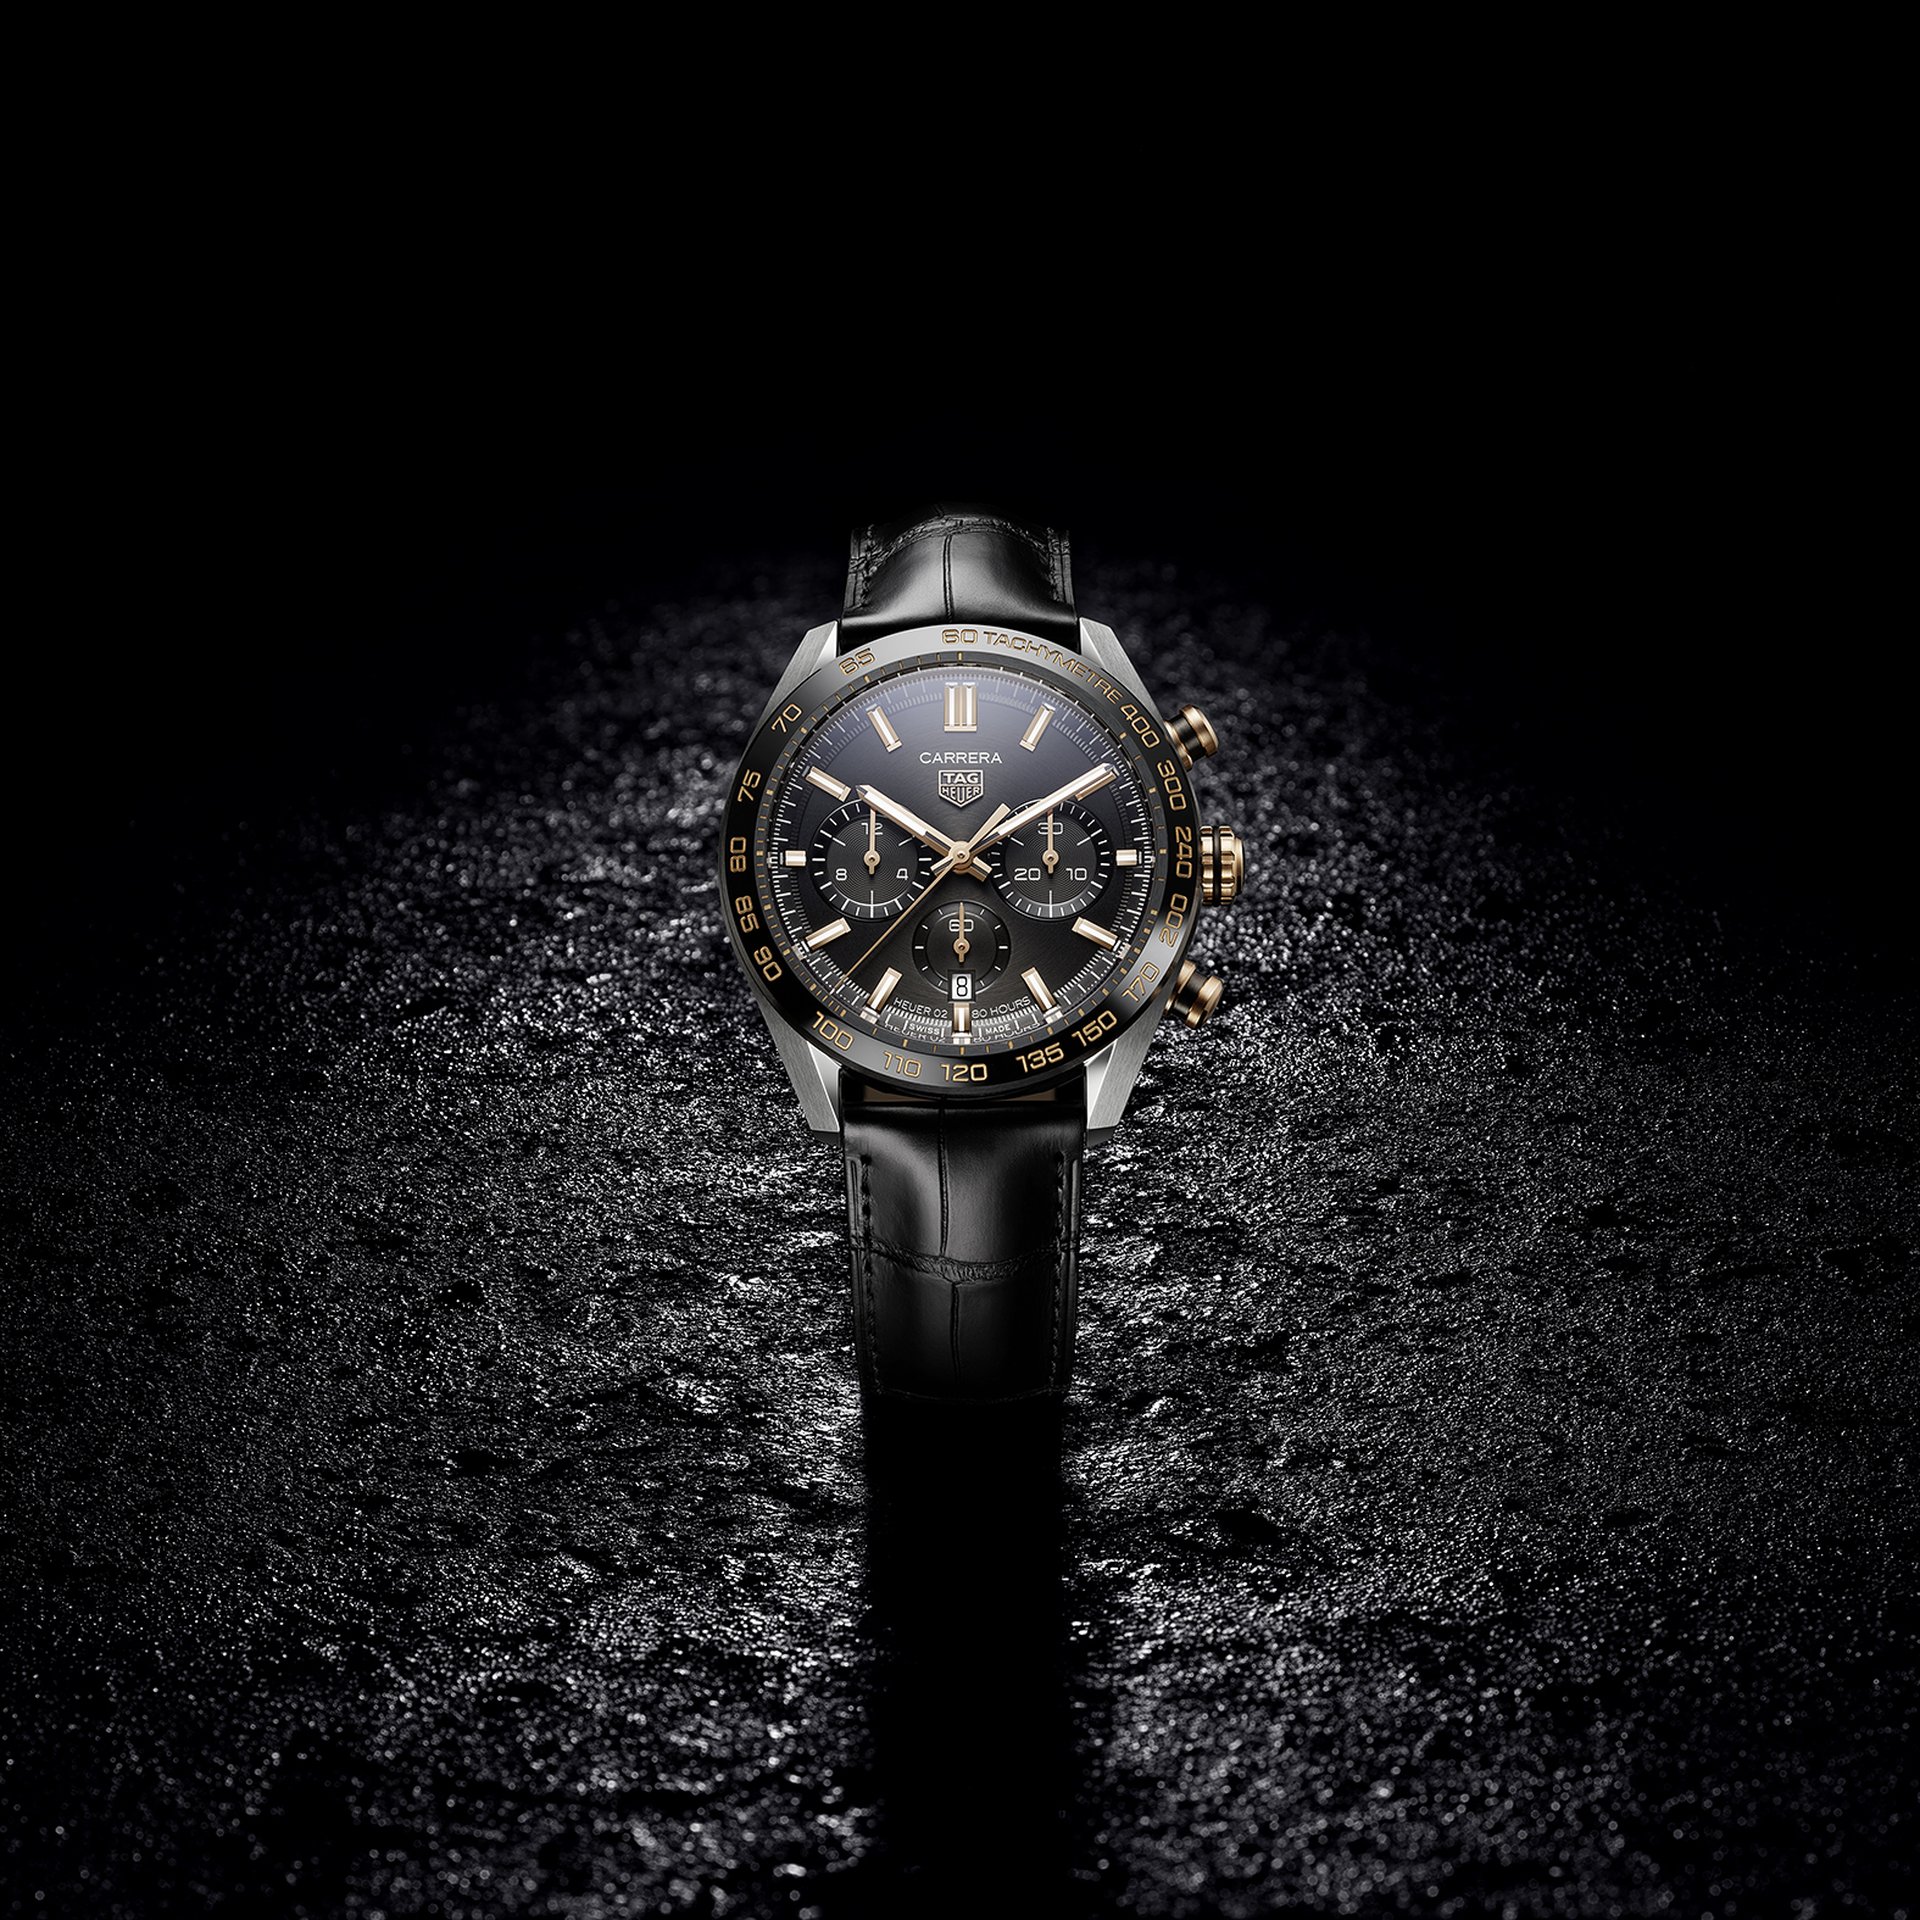 Black and Gold is a Racy Look – The New TAG Heuer Carrera Chronograph -  Revolution Watch